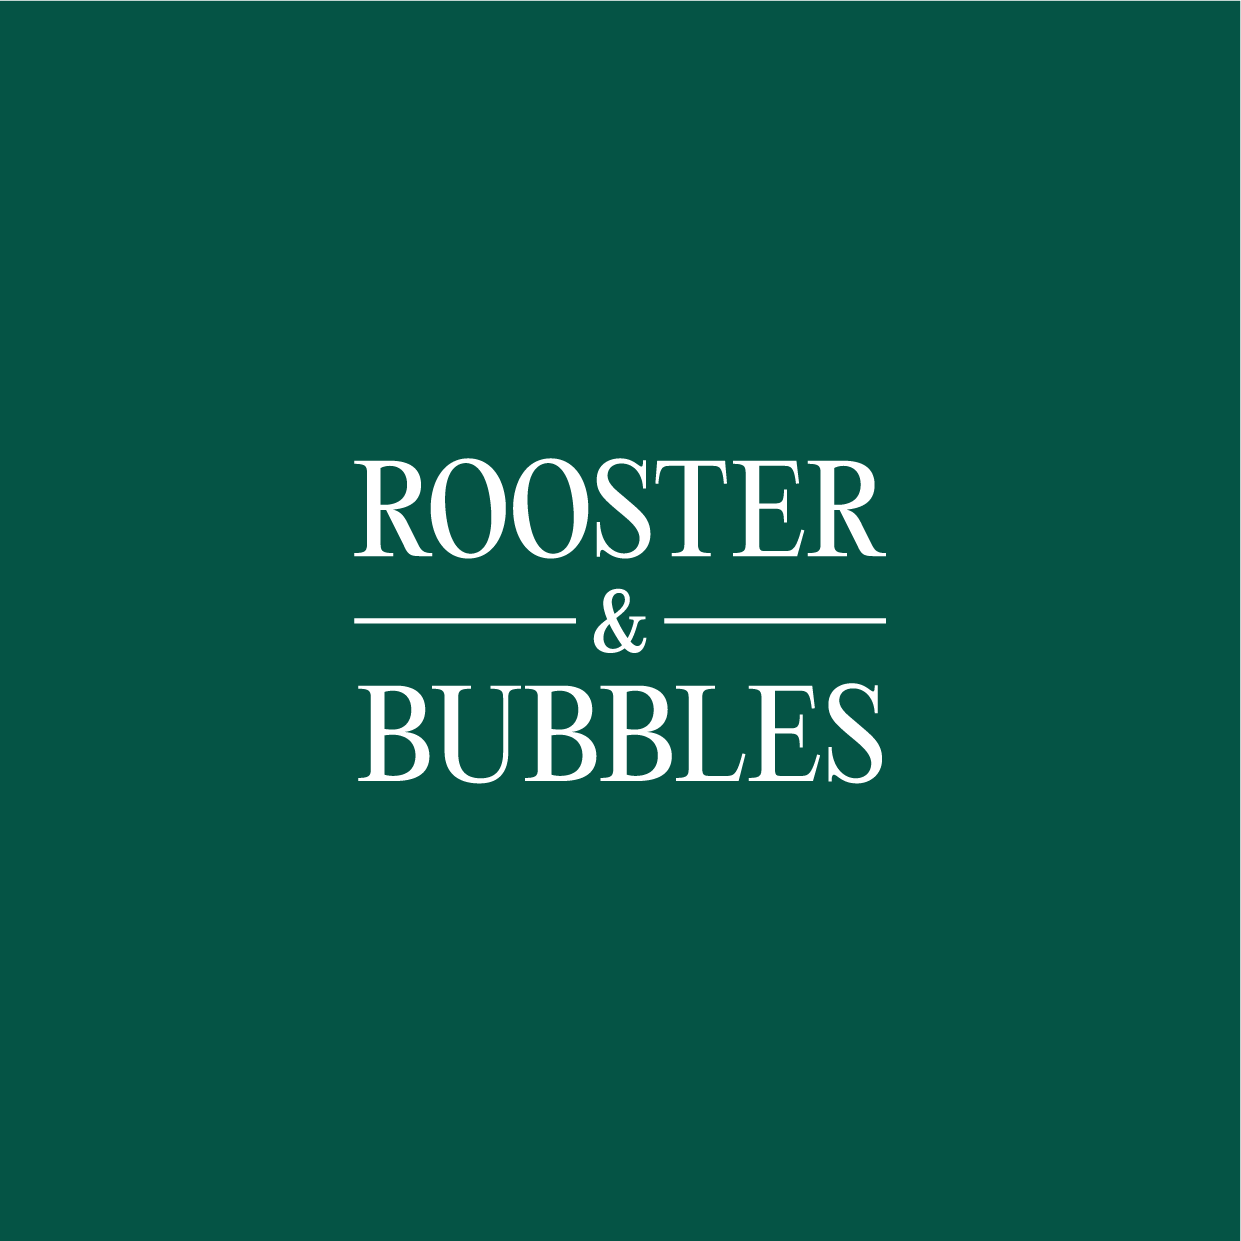 ROOSTER & BUBBLES